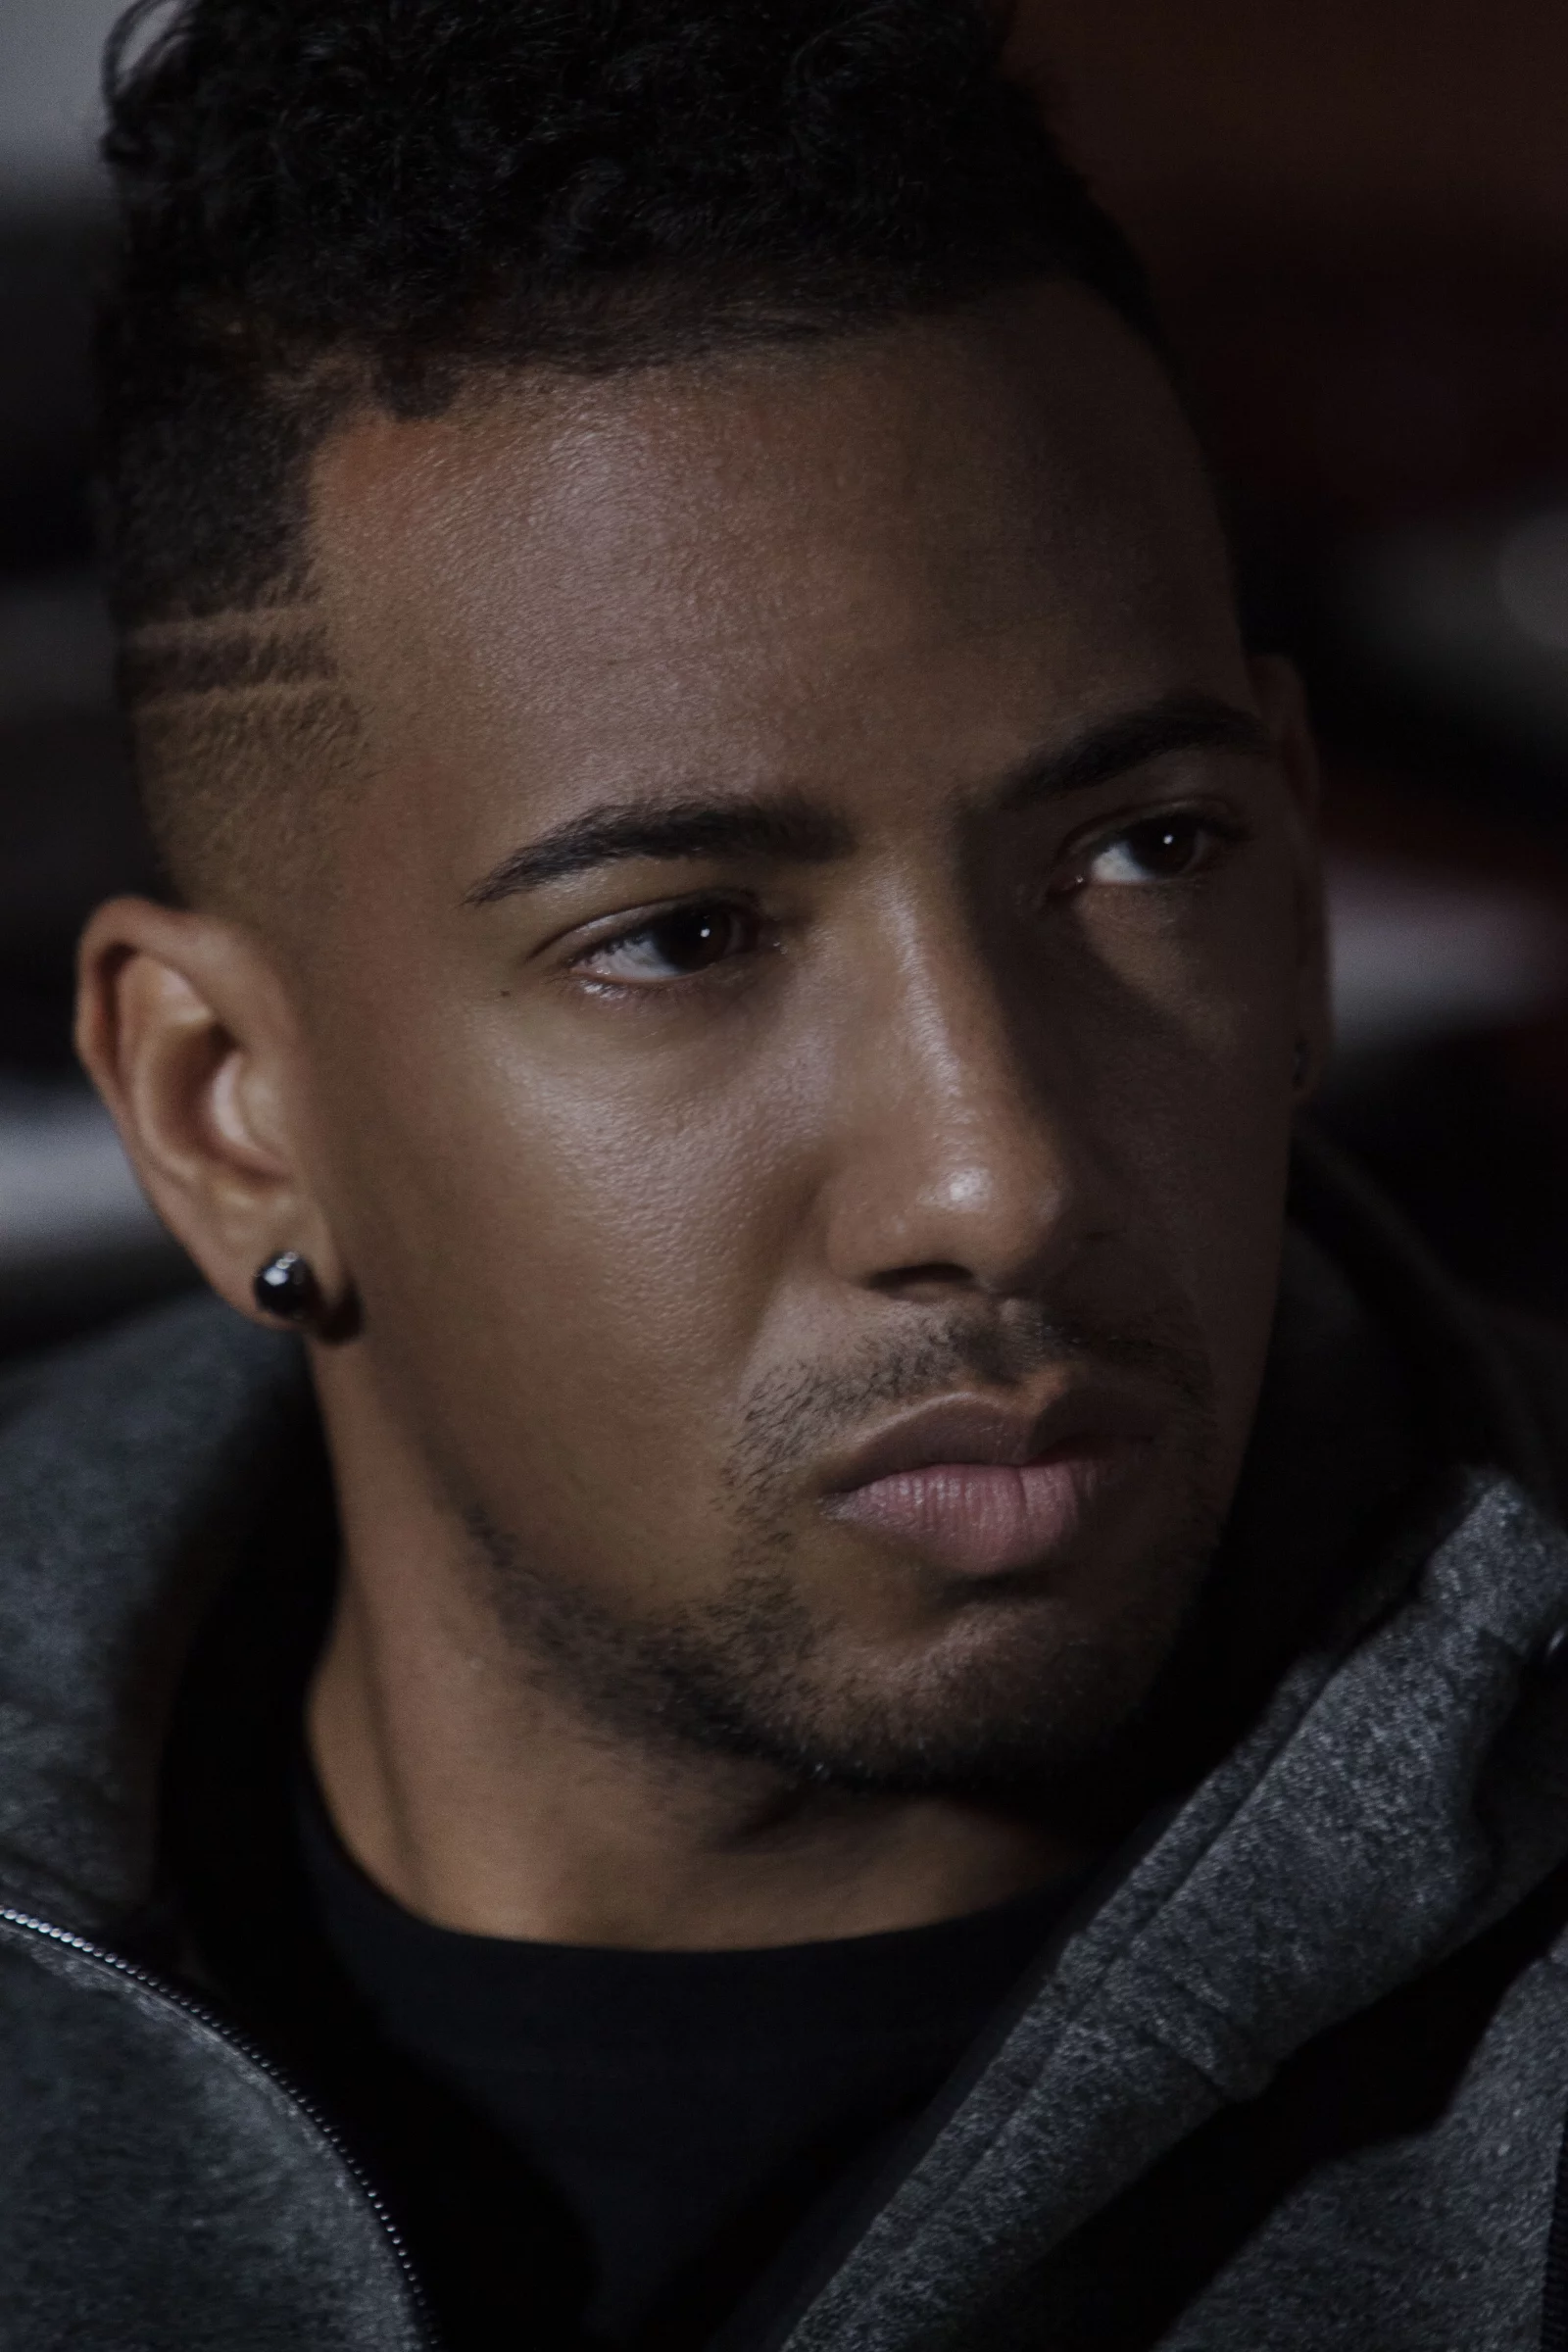 Jerome Boateng for Nike 3 by Marcus GAAB